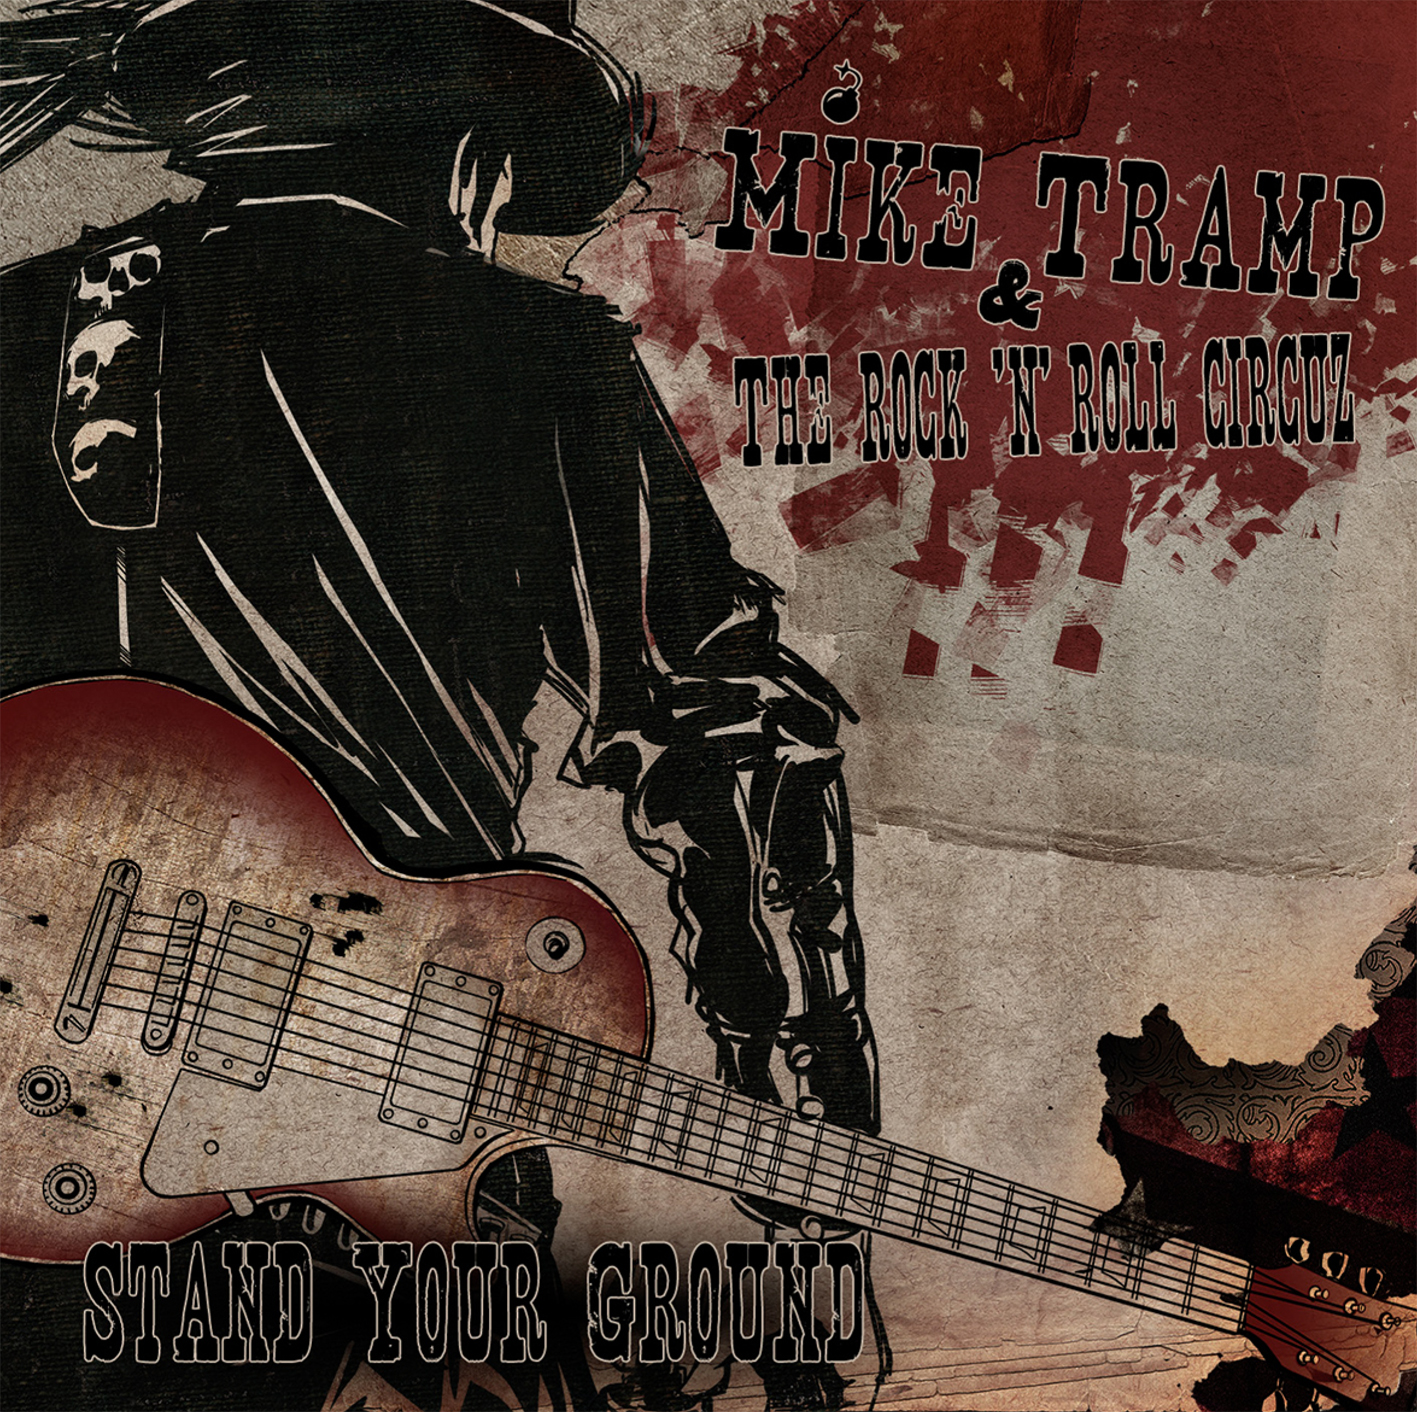 Mike Tramp And The Rock ‘n’ Roll Circuz “Stand Your Ground” (reissue)